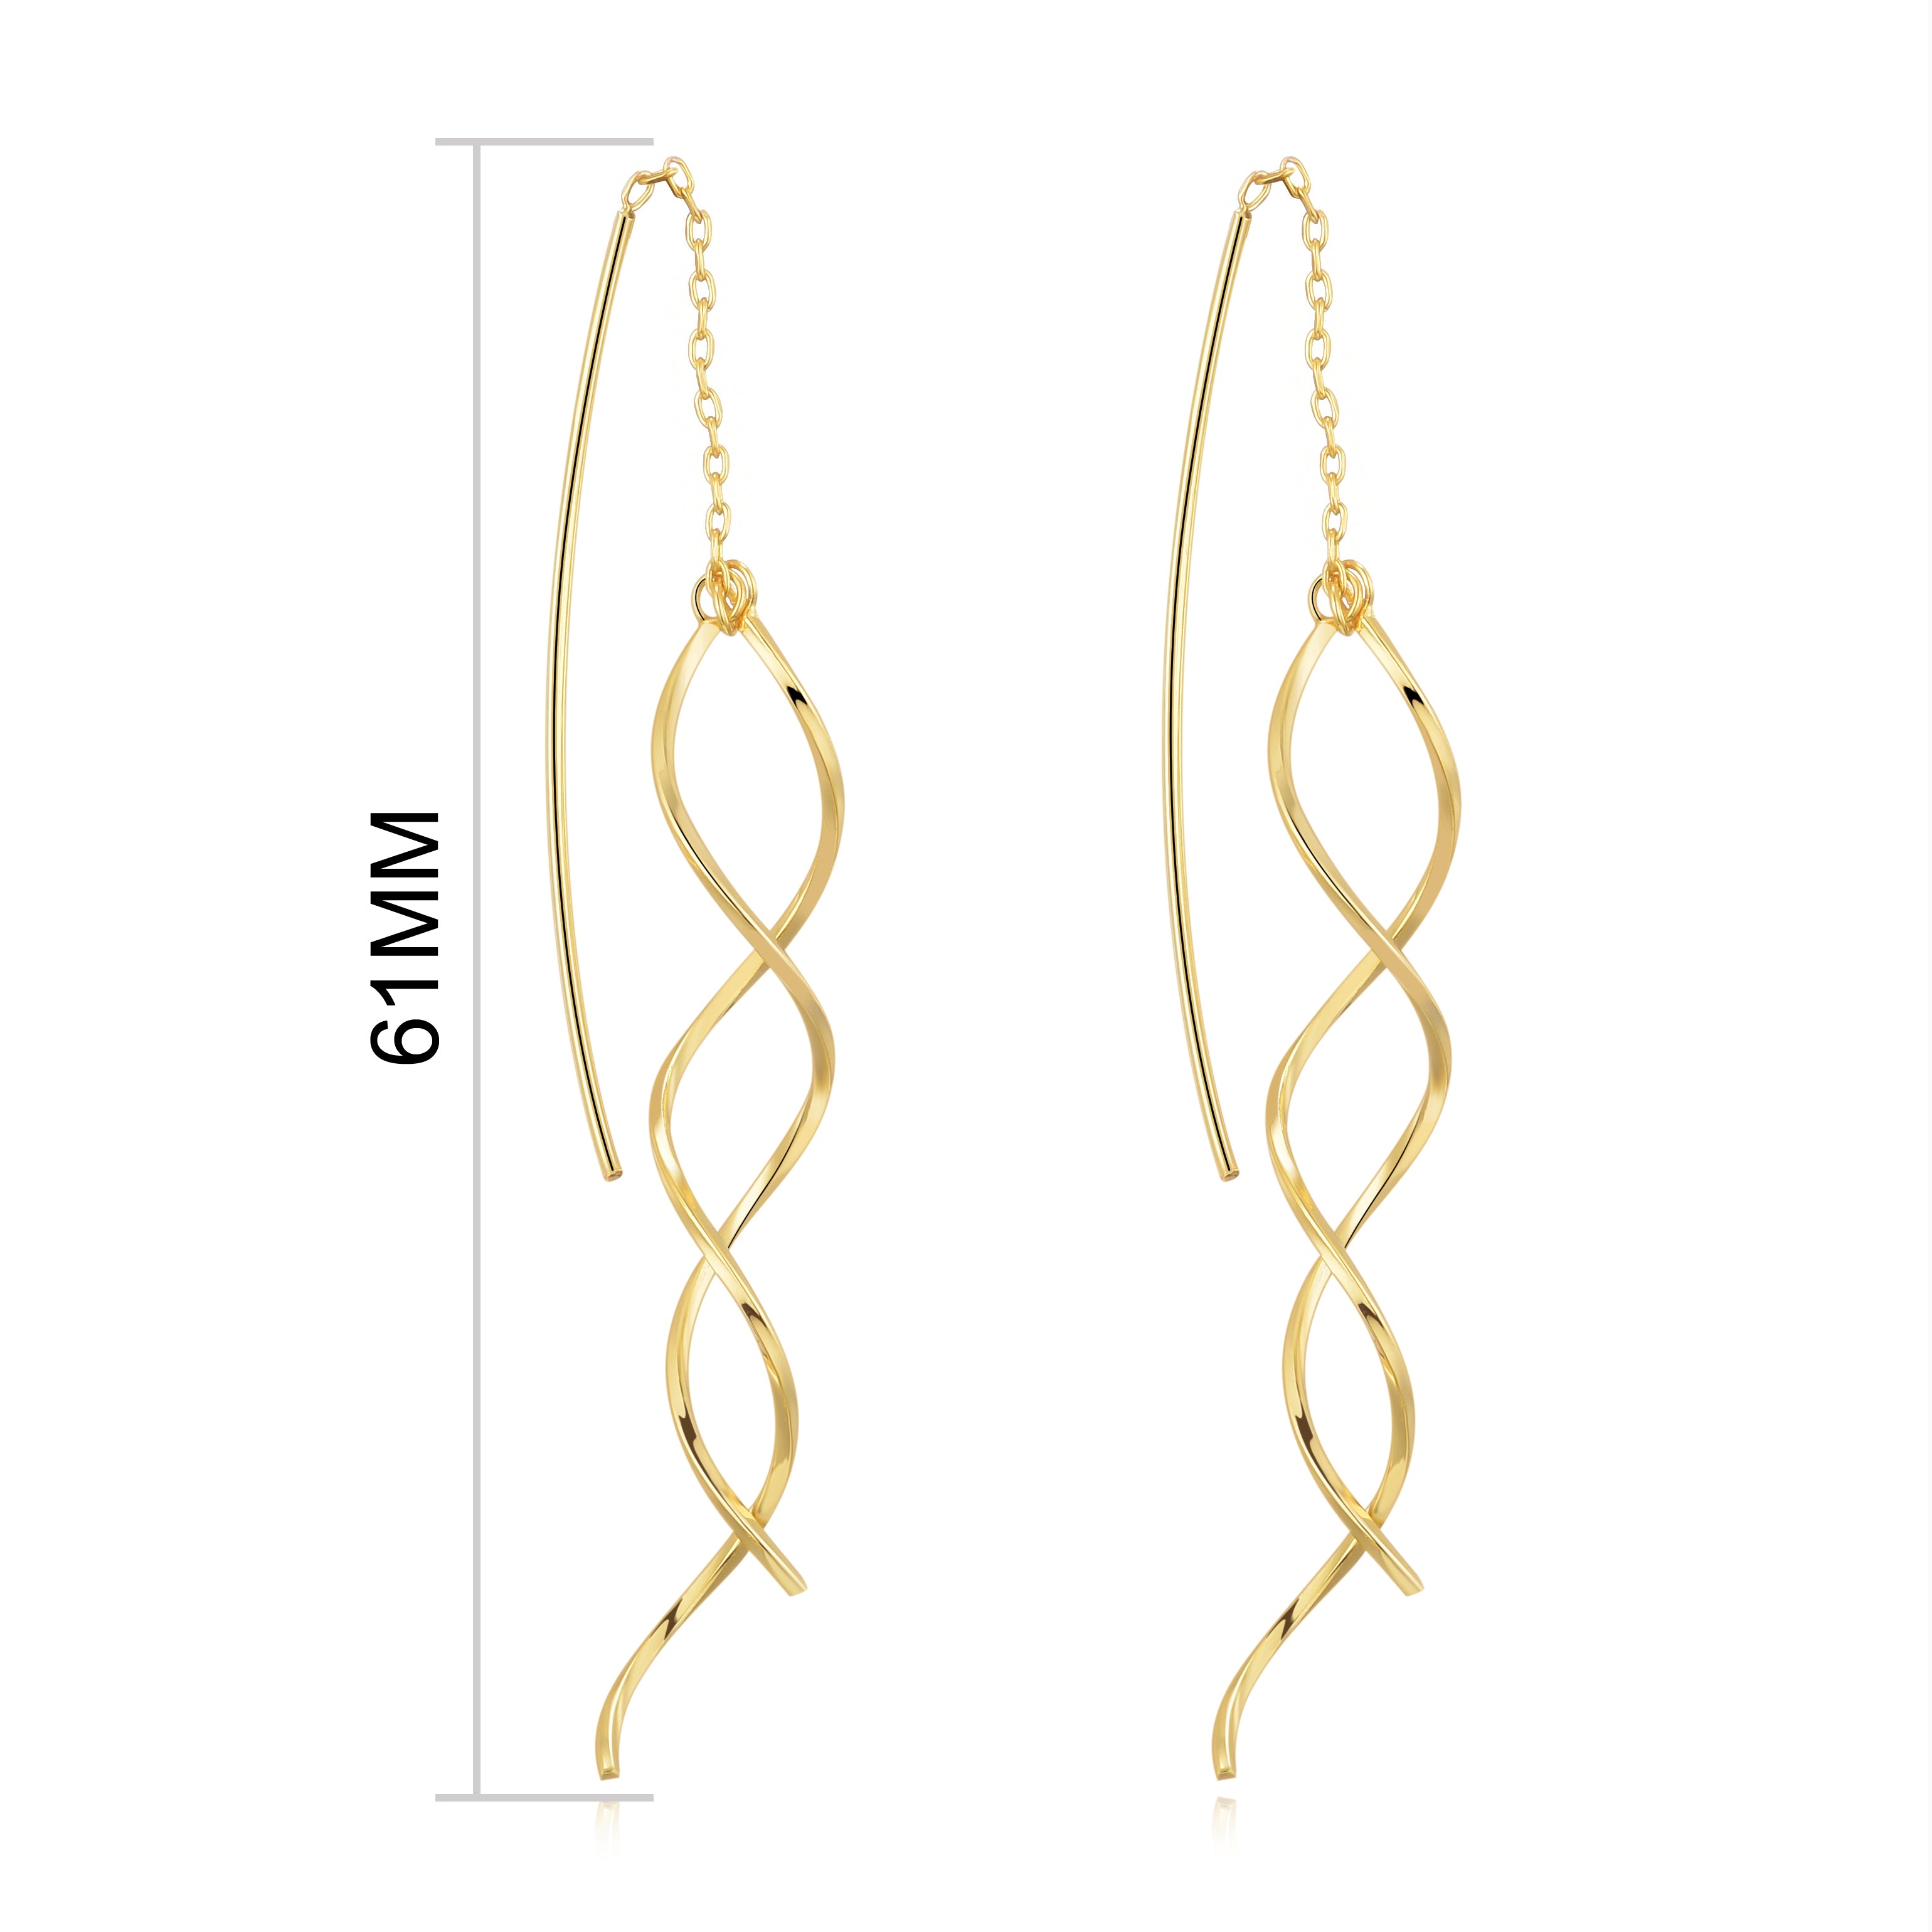 Gold Plated Spiral Thread Earrings